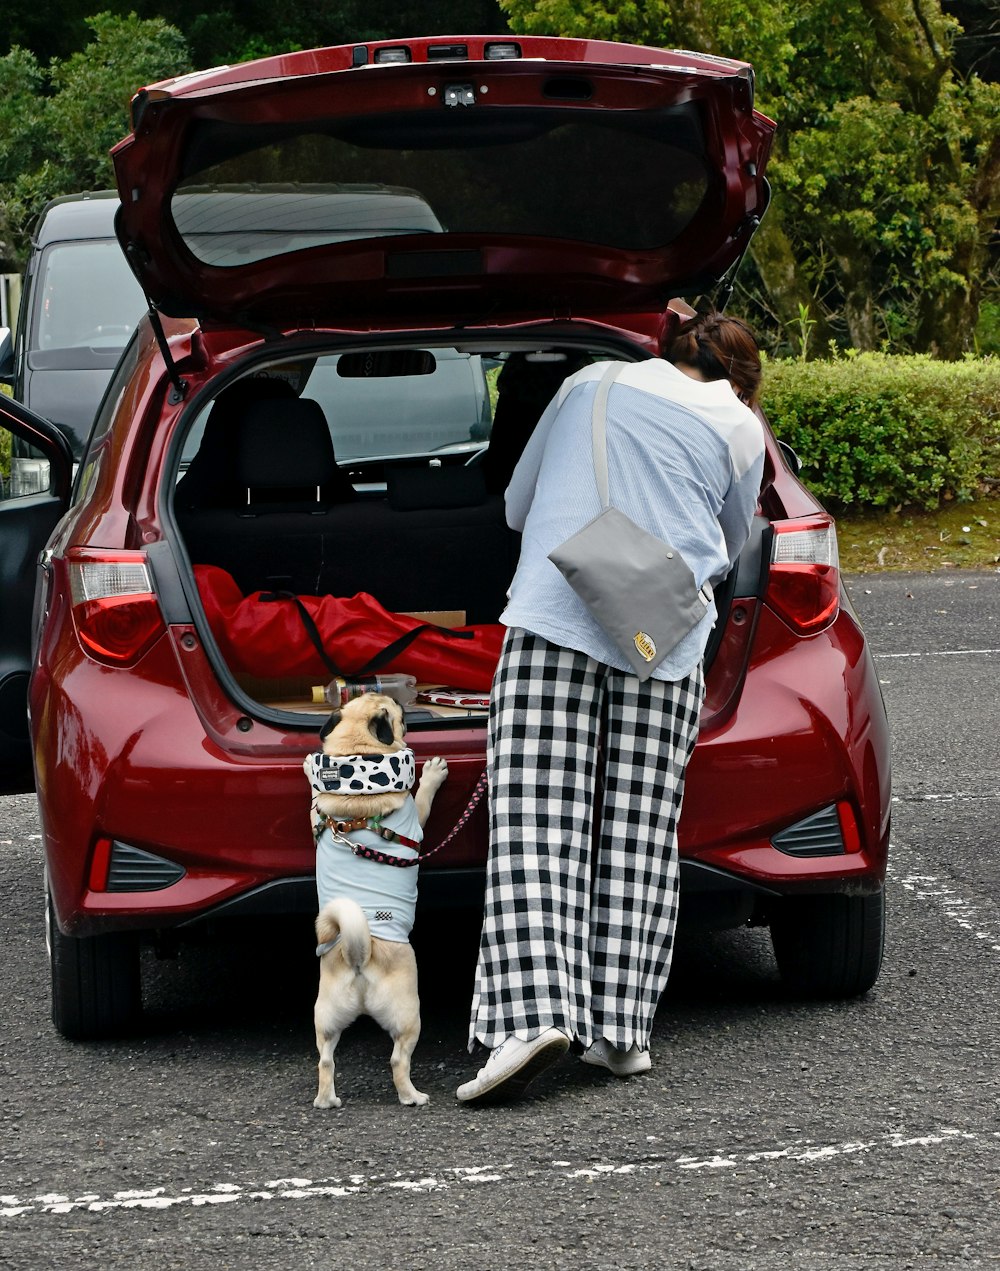 a woman standing next to a dog in a parking lot